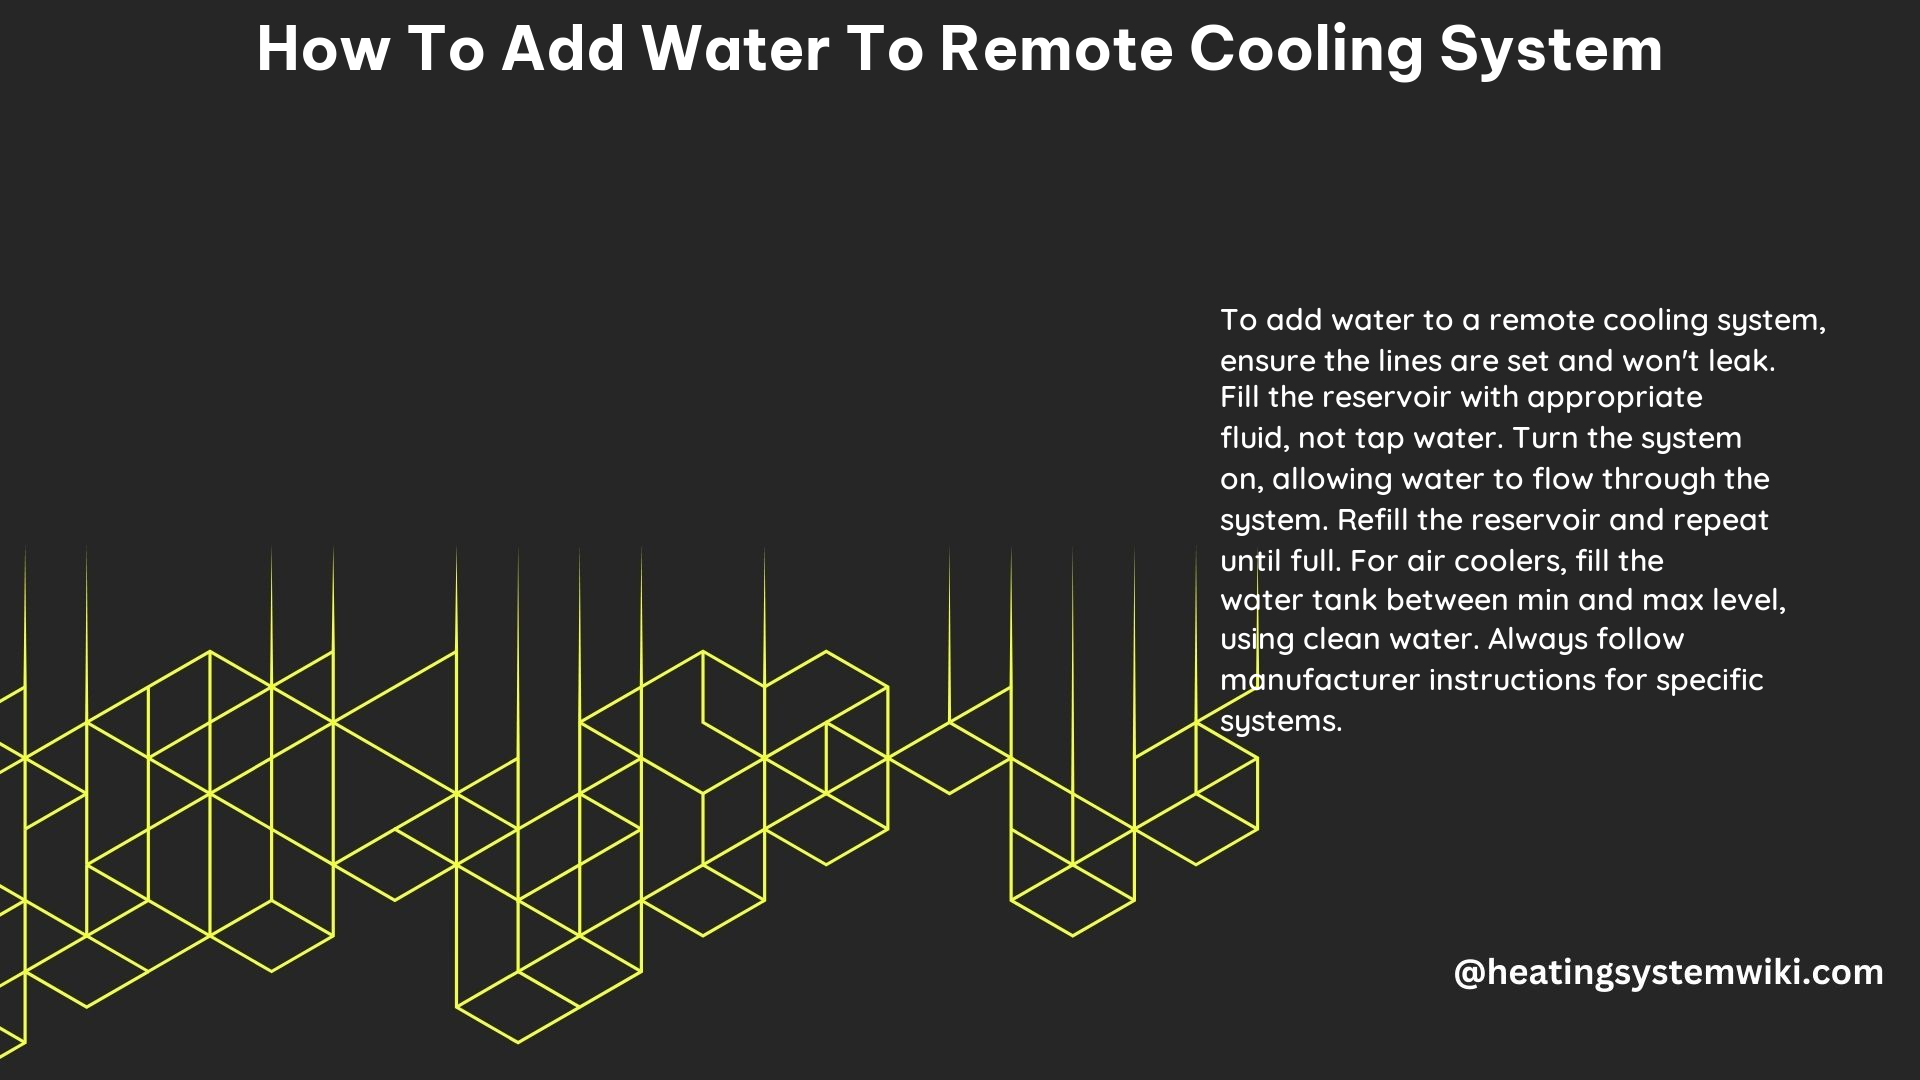 How to Add Water to Remote Cooling System